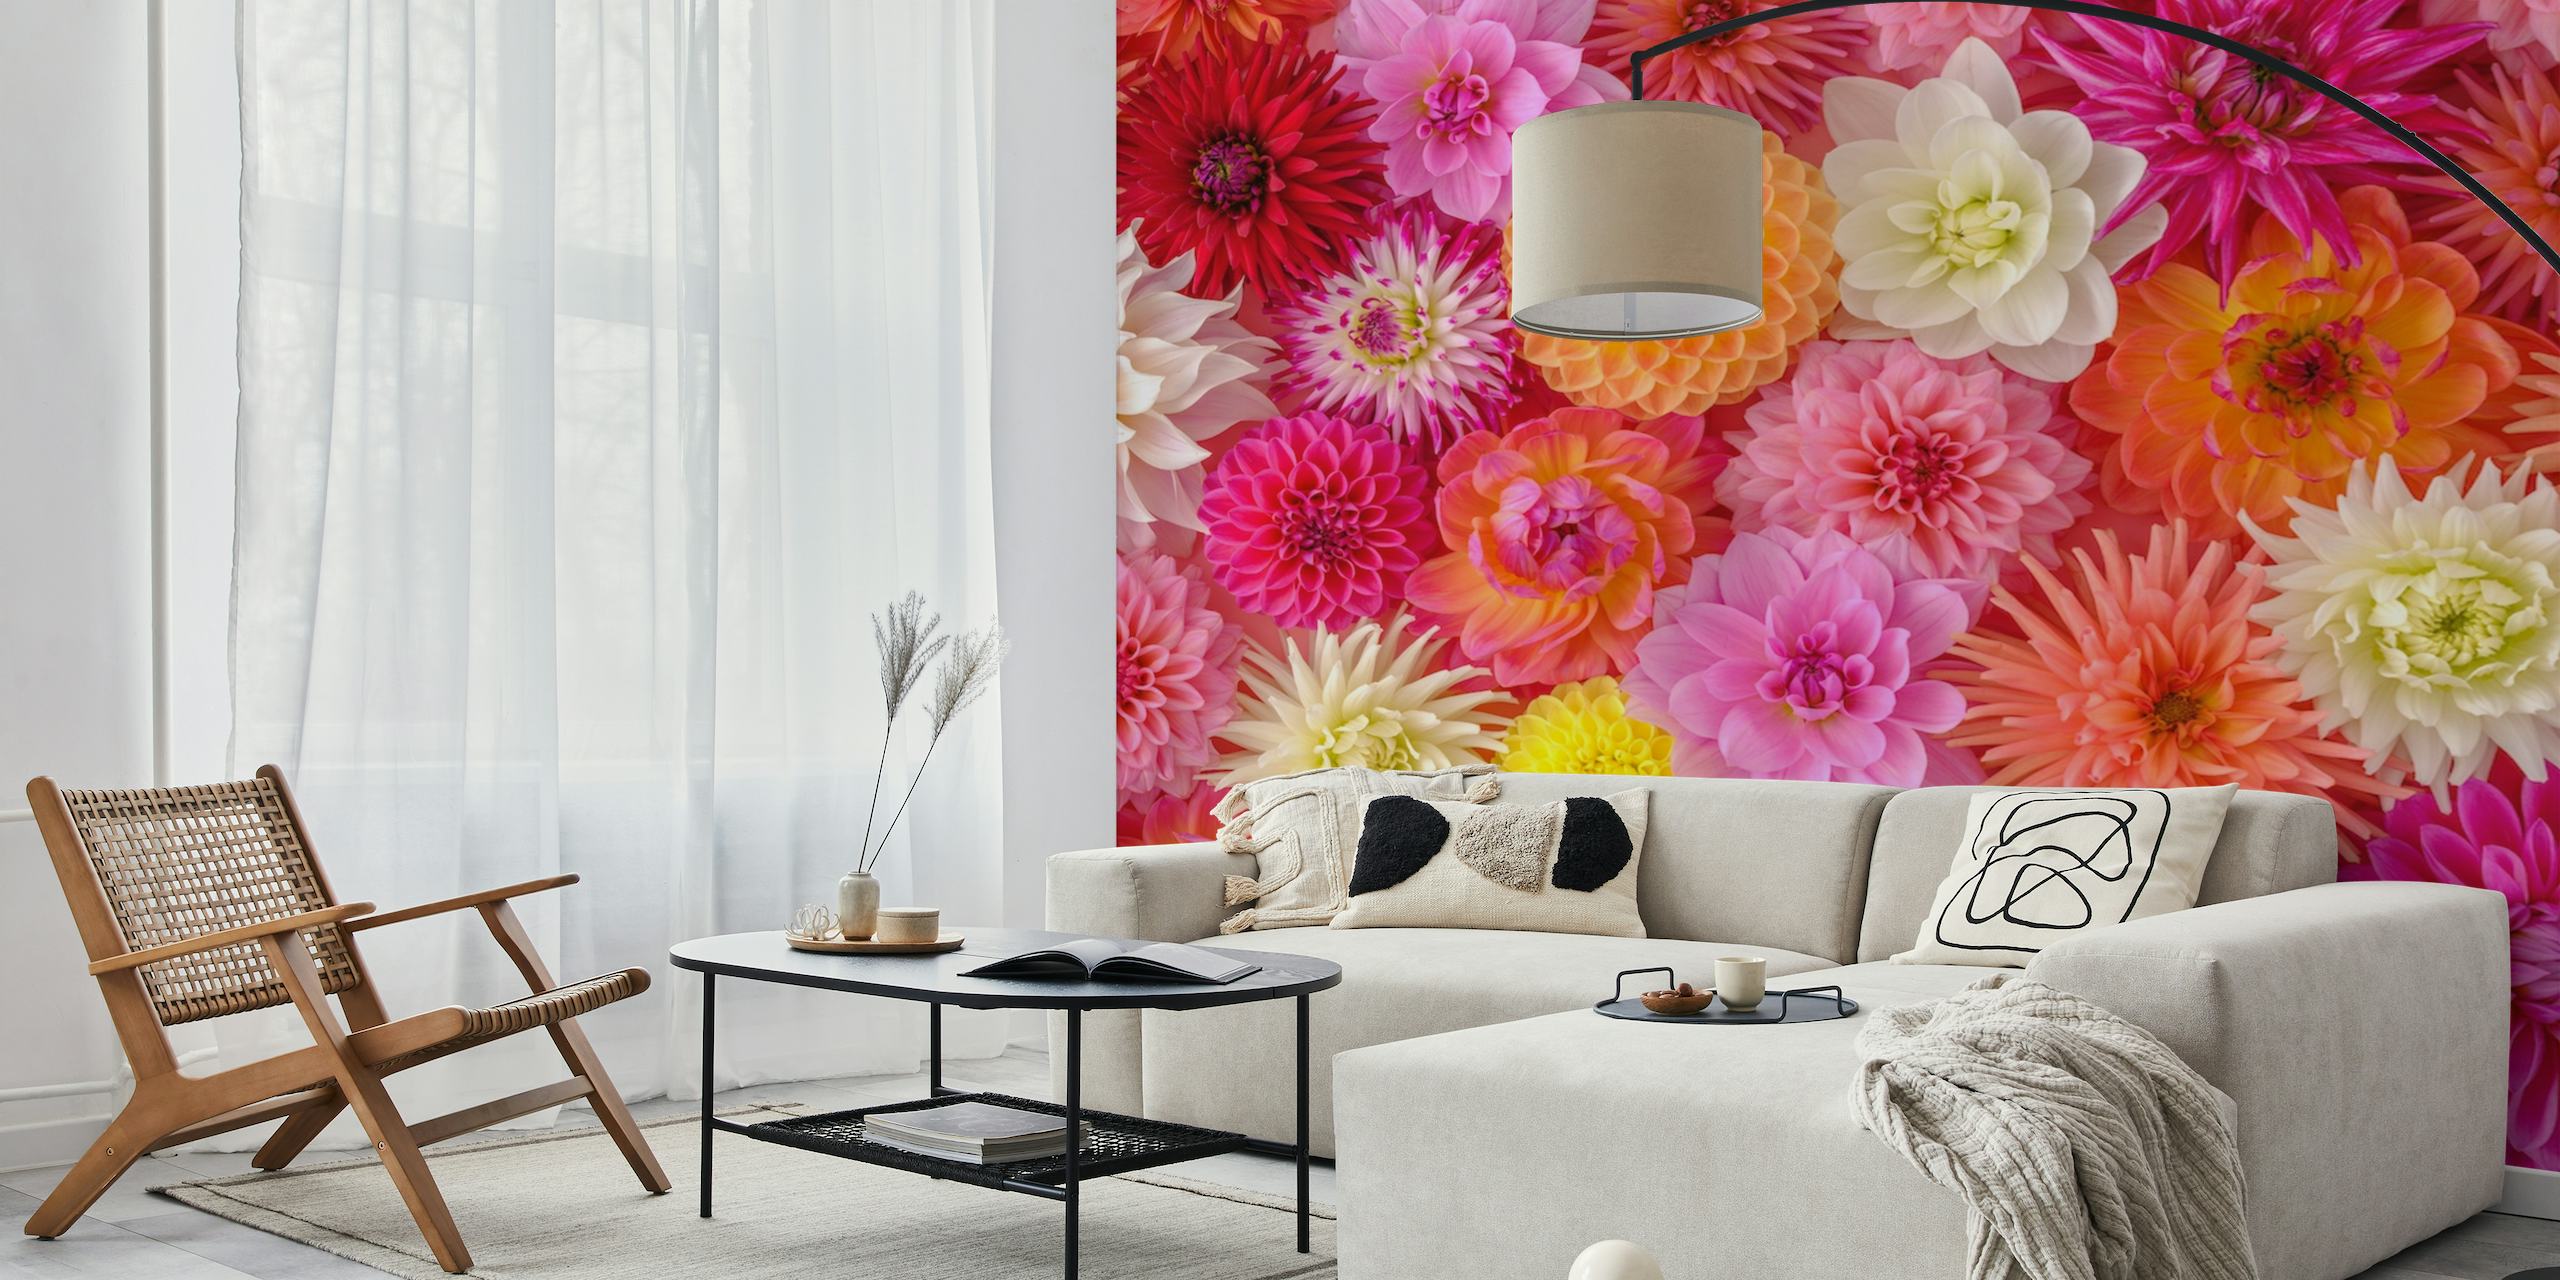 Colorful floral wall mural with a medley of blossoms in pinks and whites